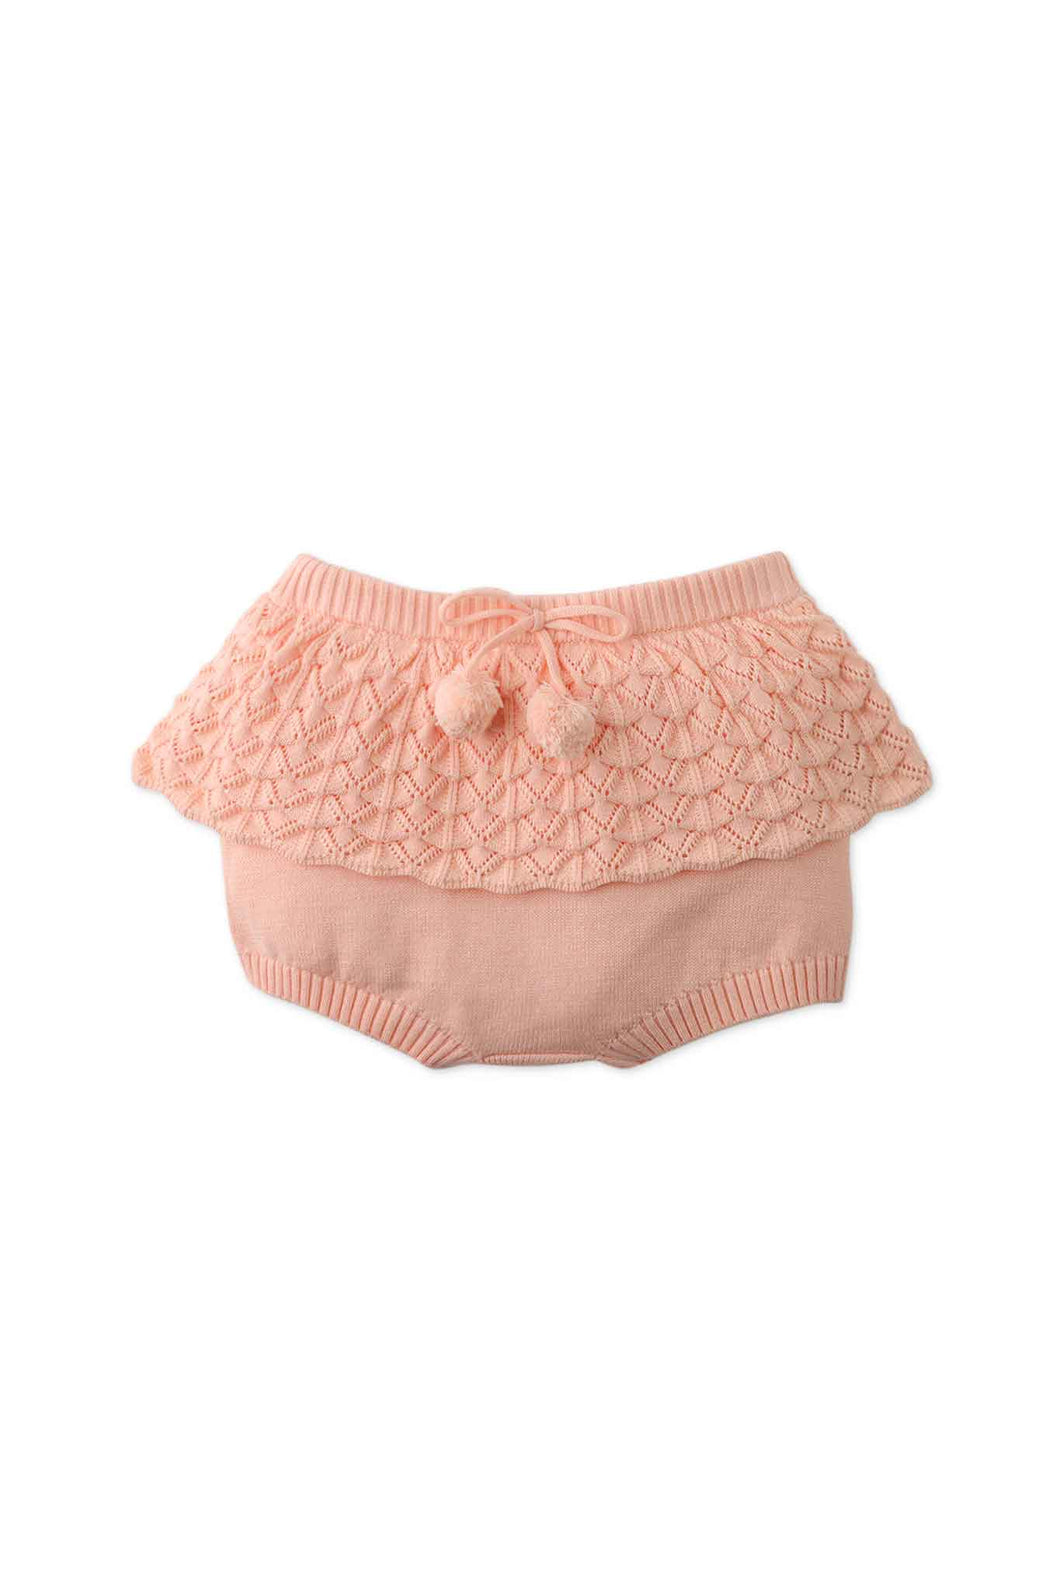 Gingersnaps Knitted Ruffle & Pleated Skorts with Ties